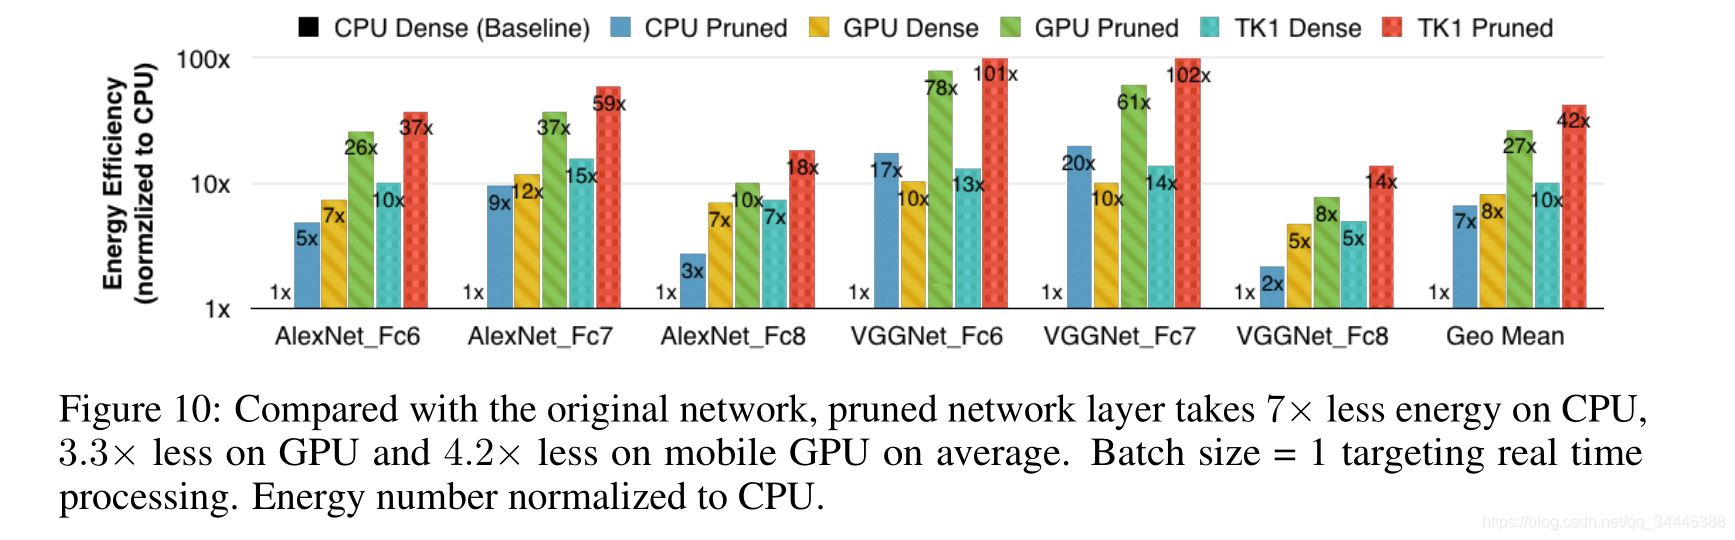 deep compression:compressing deep neural networks with pruning,trained quantization and huffman codi